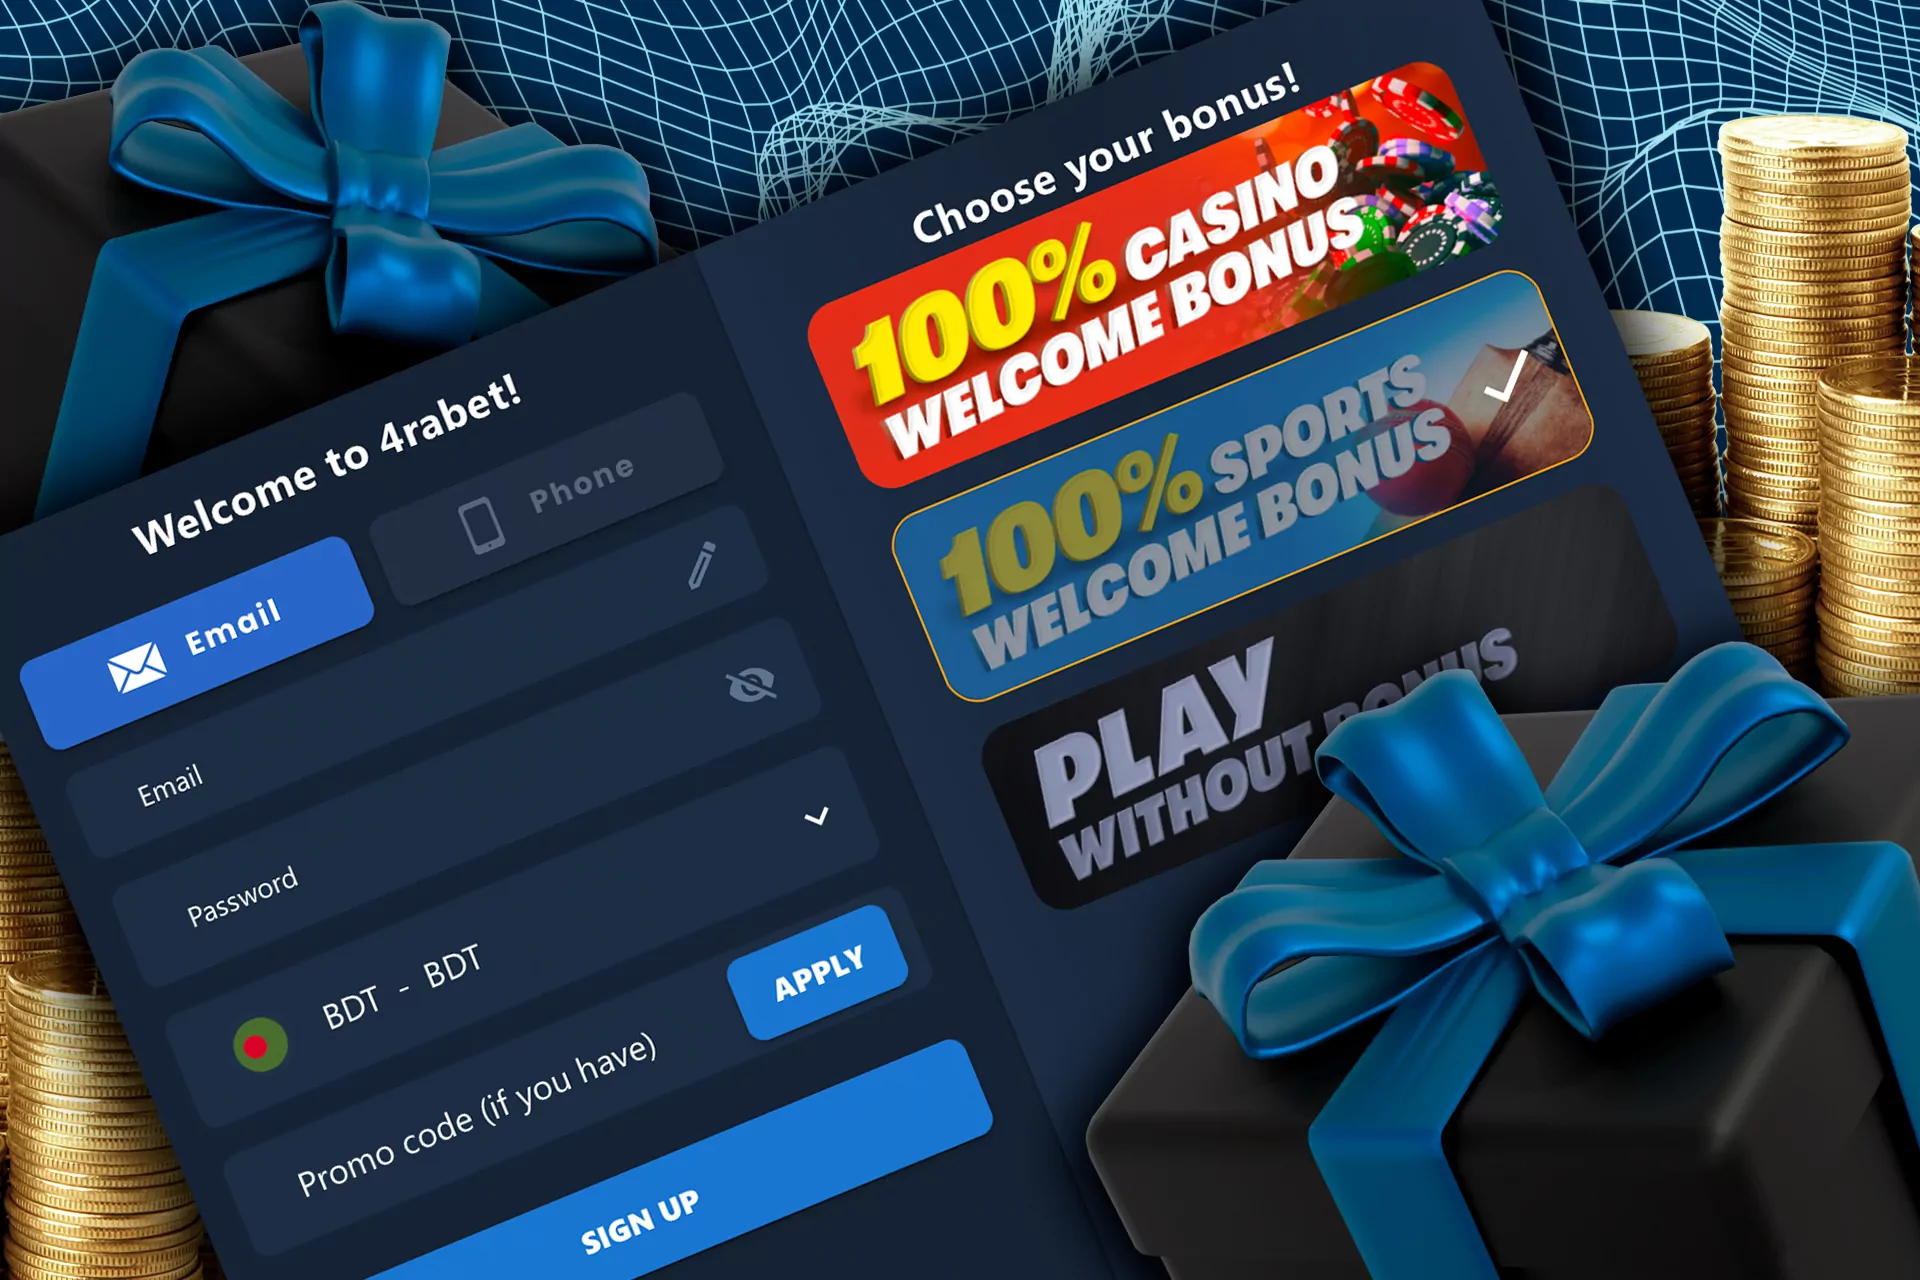 4rabet Bd offers casino welcome bonus for new users to take advantage of the welcome bonus.